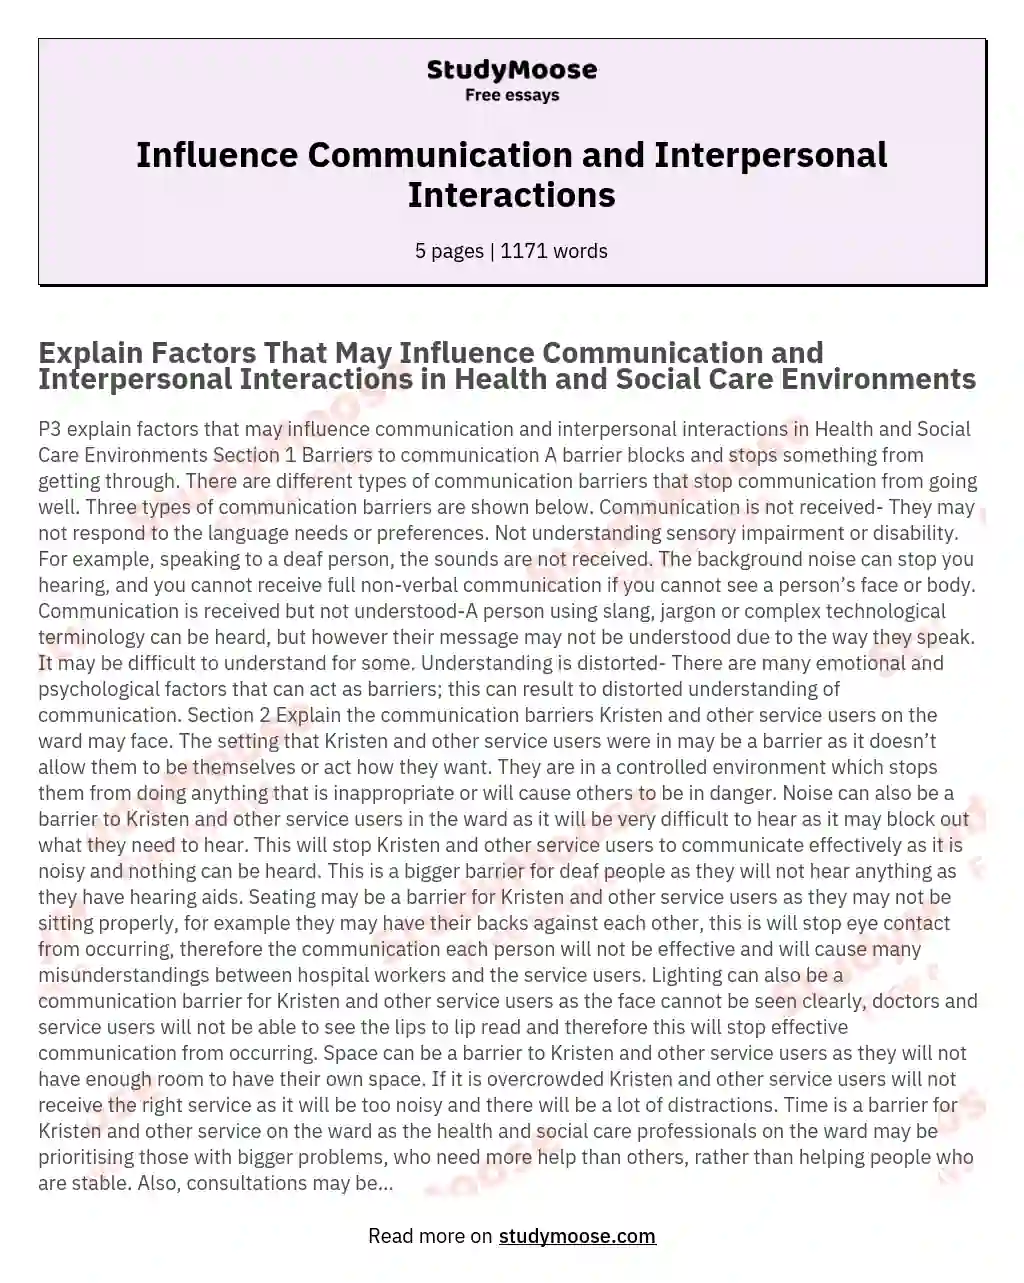 Influence Communication and Interpersonal Interactions essay